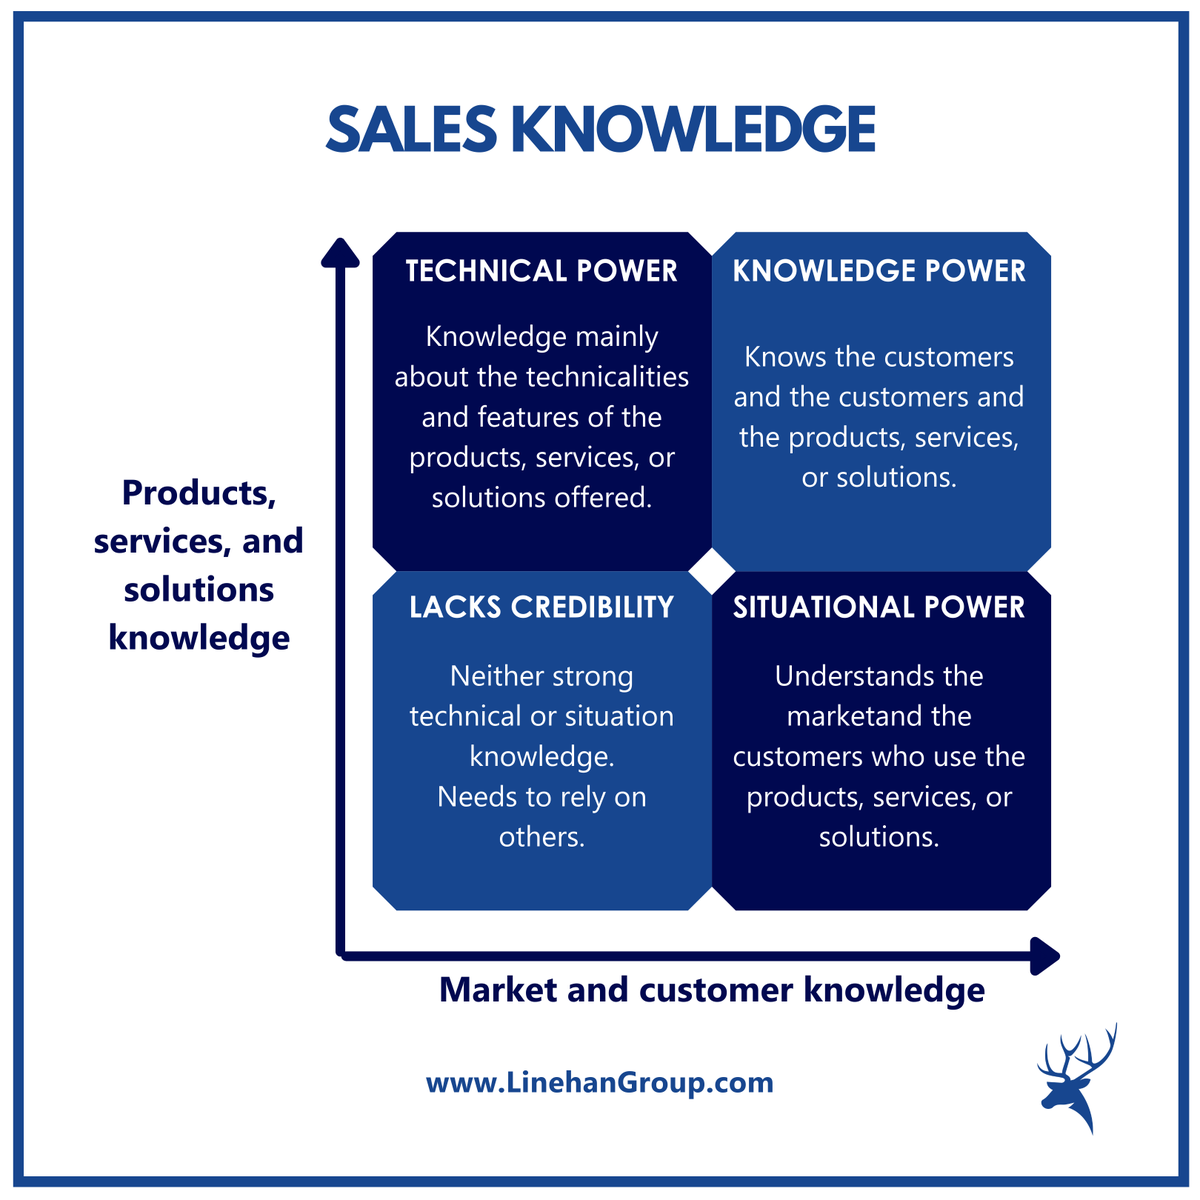 Contact us now to start your sales performance revolution.
linehangroup.com
#salesknowledge #salesprocess #salescoaching #salestraining #buildyourbrand